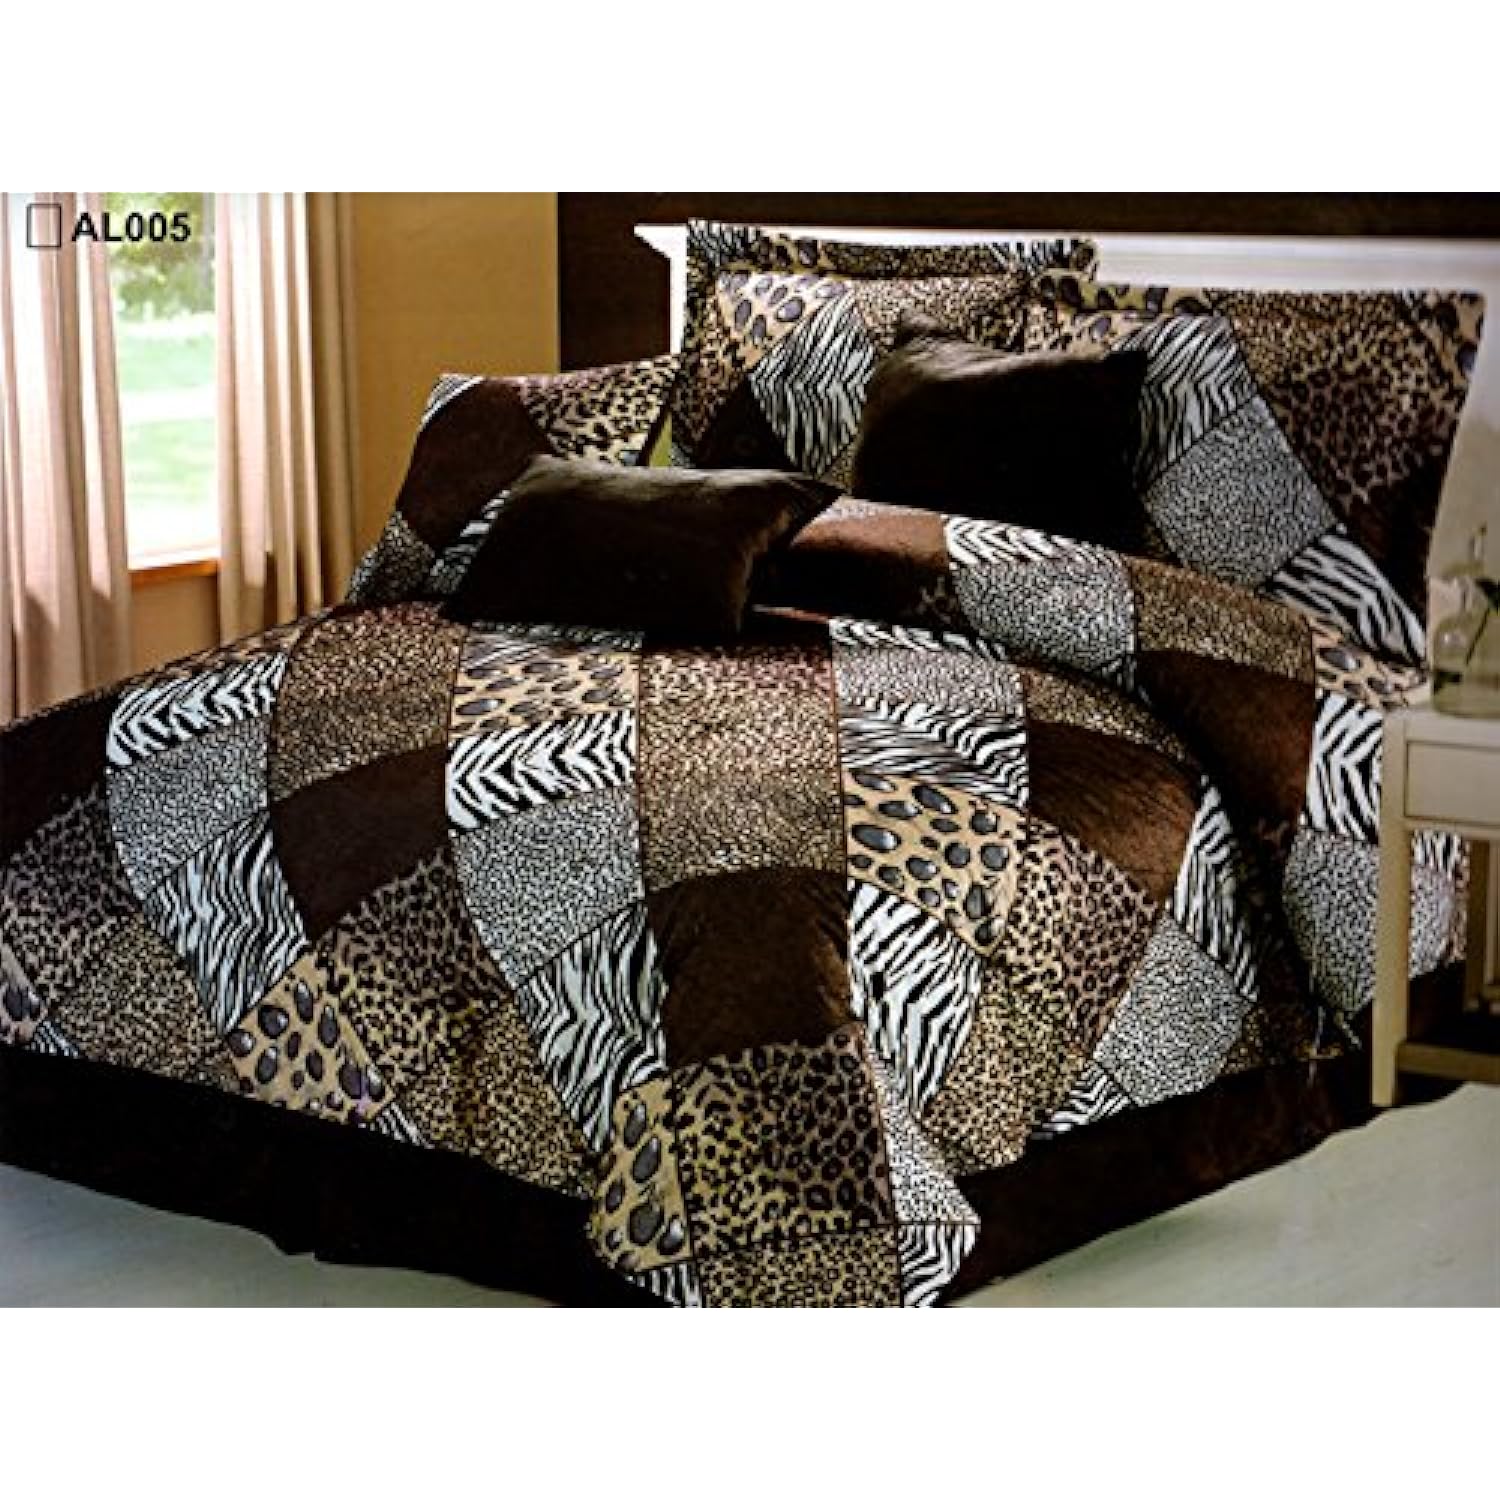 TKM Home Brown/Black/White Comforter Set Animal Print Microfur Bed In A Bag  Queen Size Bedding